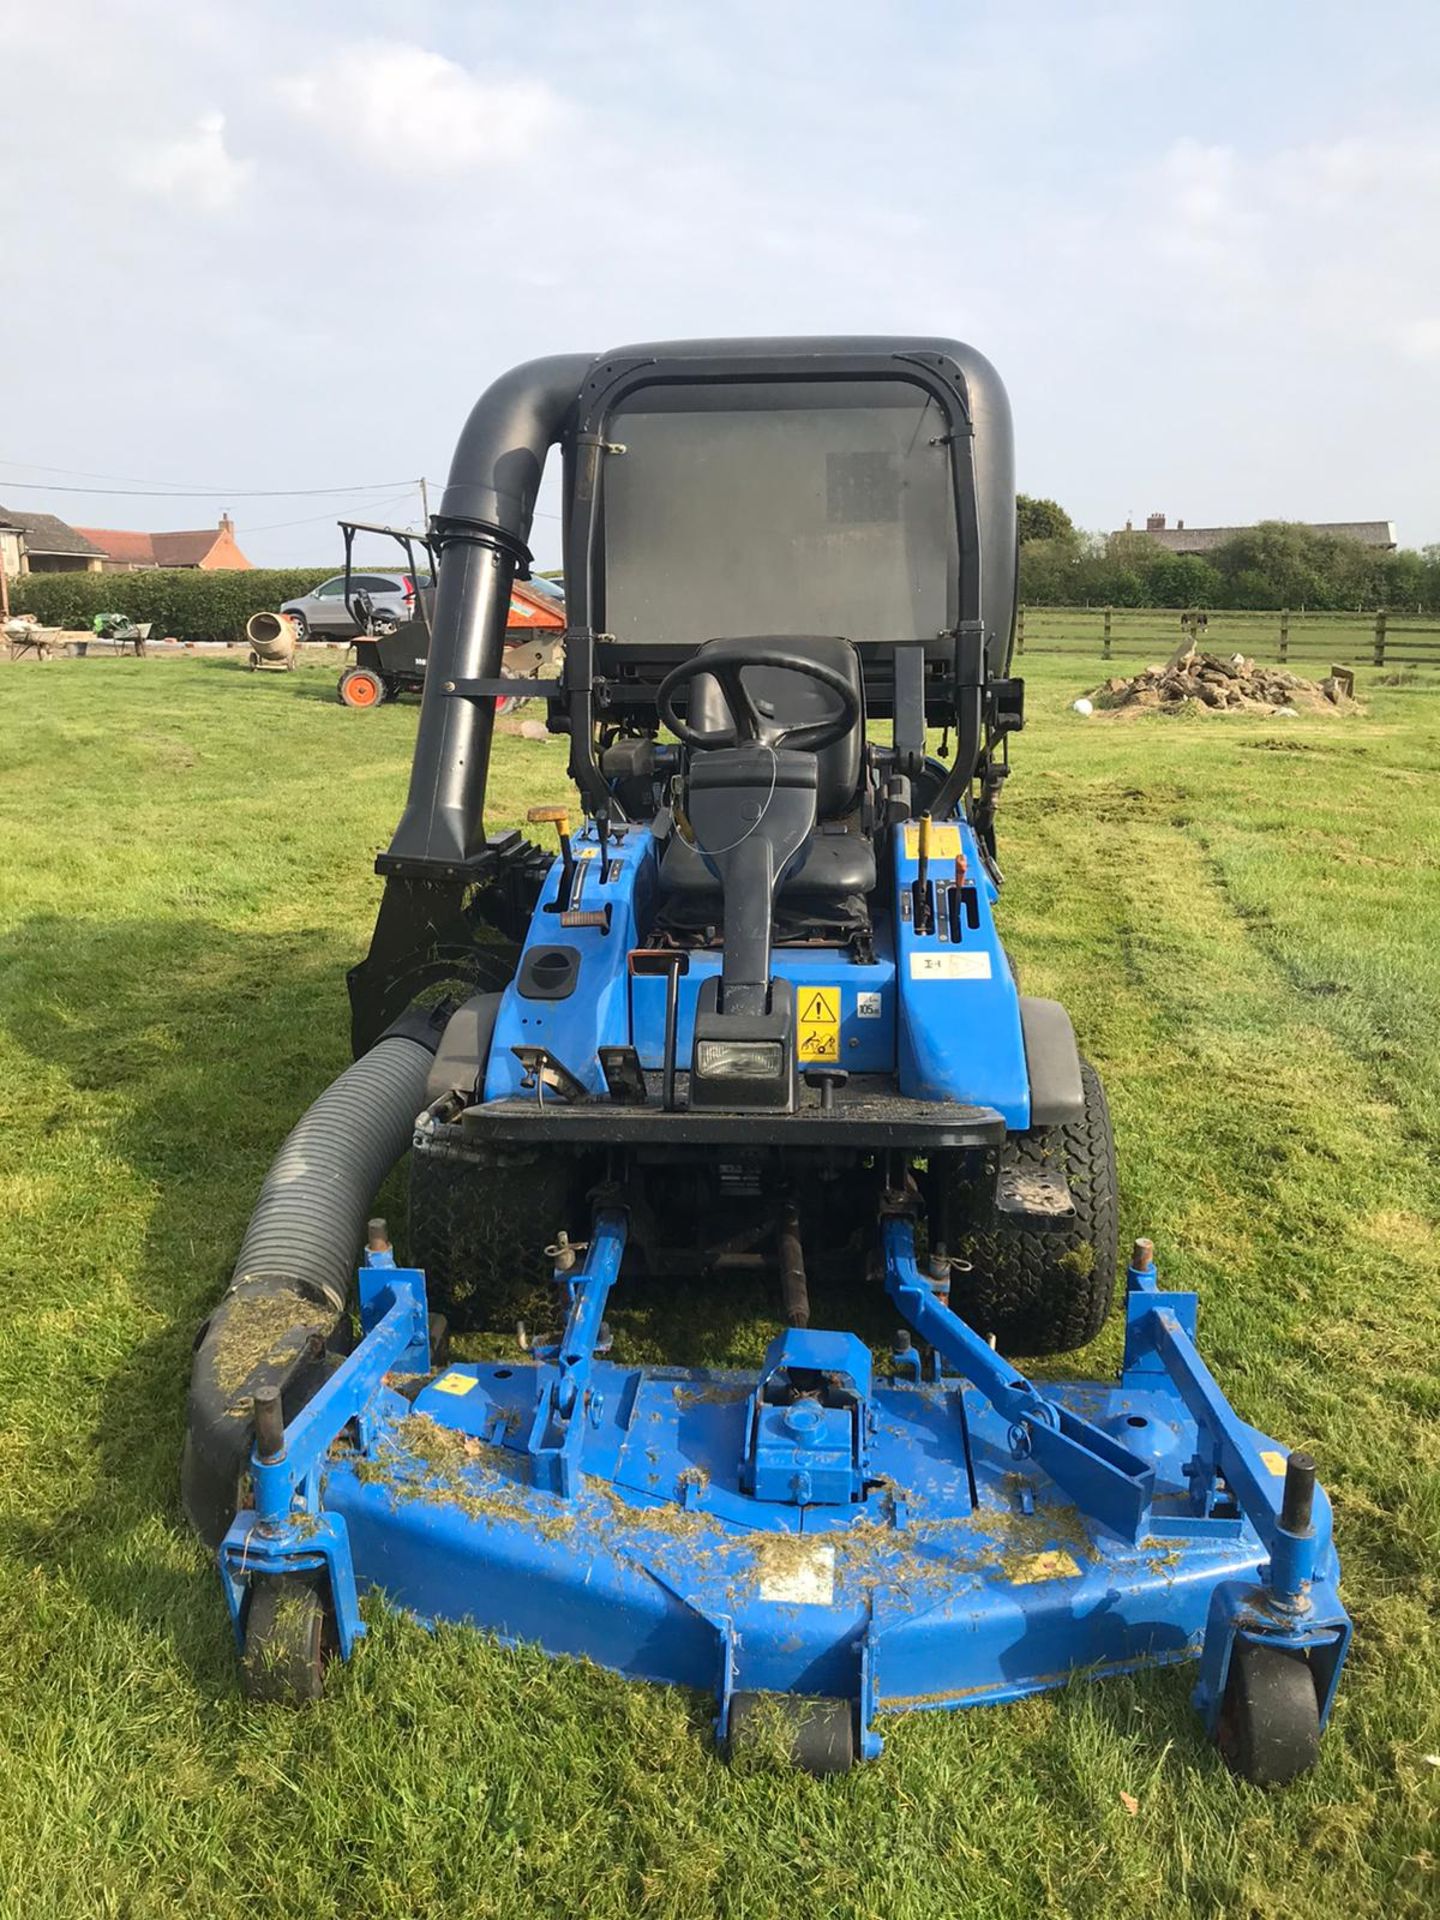 2008 NEW HOLLAND MC25 RIDE ON LAWN MOWER, HIGH LIFT GRASS COLLECTOR, RUNS, DRIVES, CUTS *PLUS VAT* - Image 2 of 5